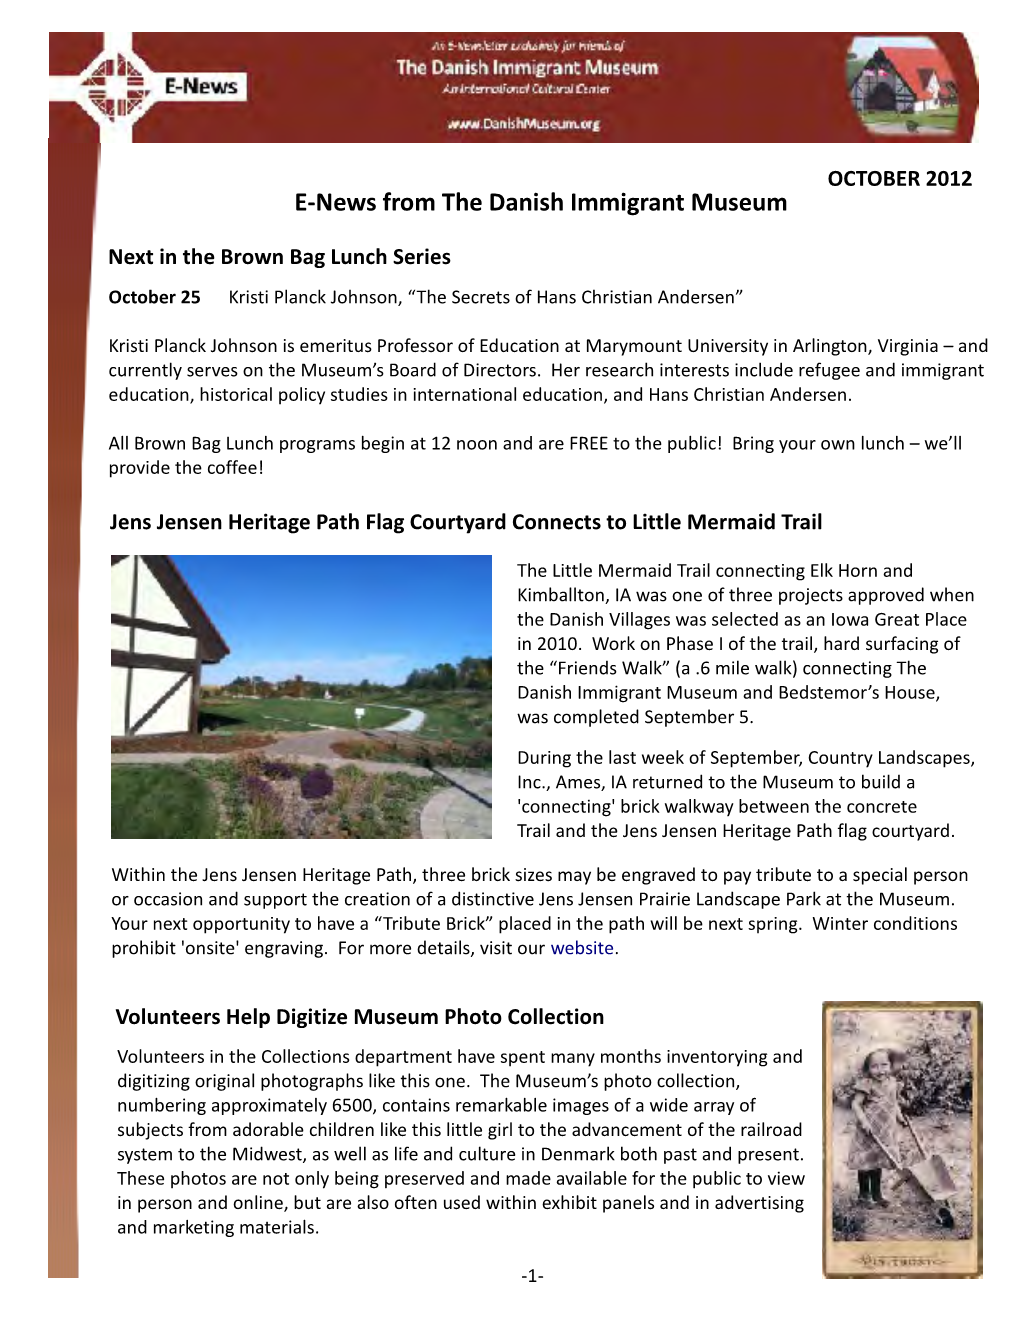 E-News from the Danish Immigrant Museum